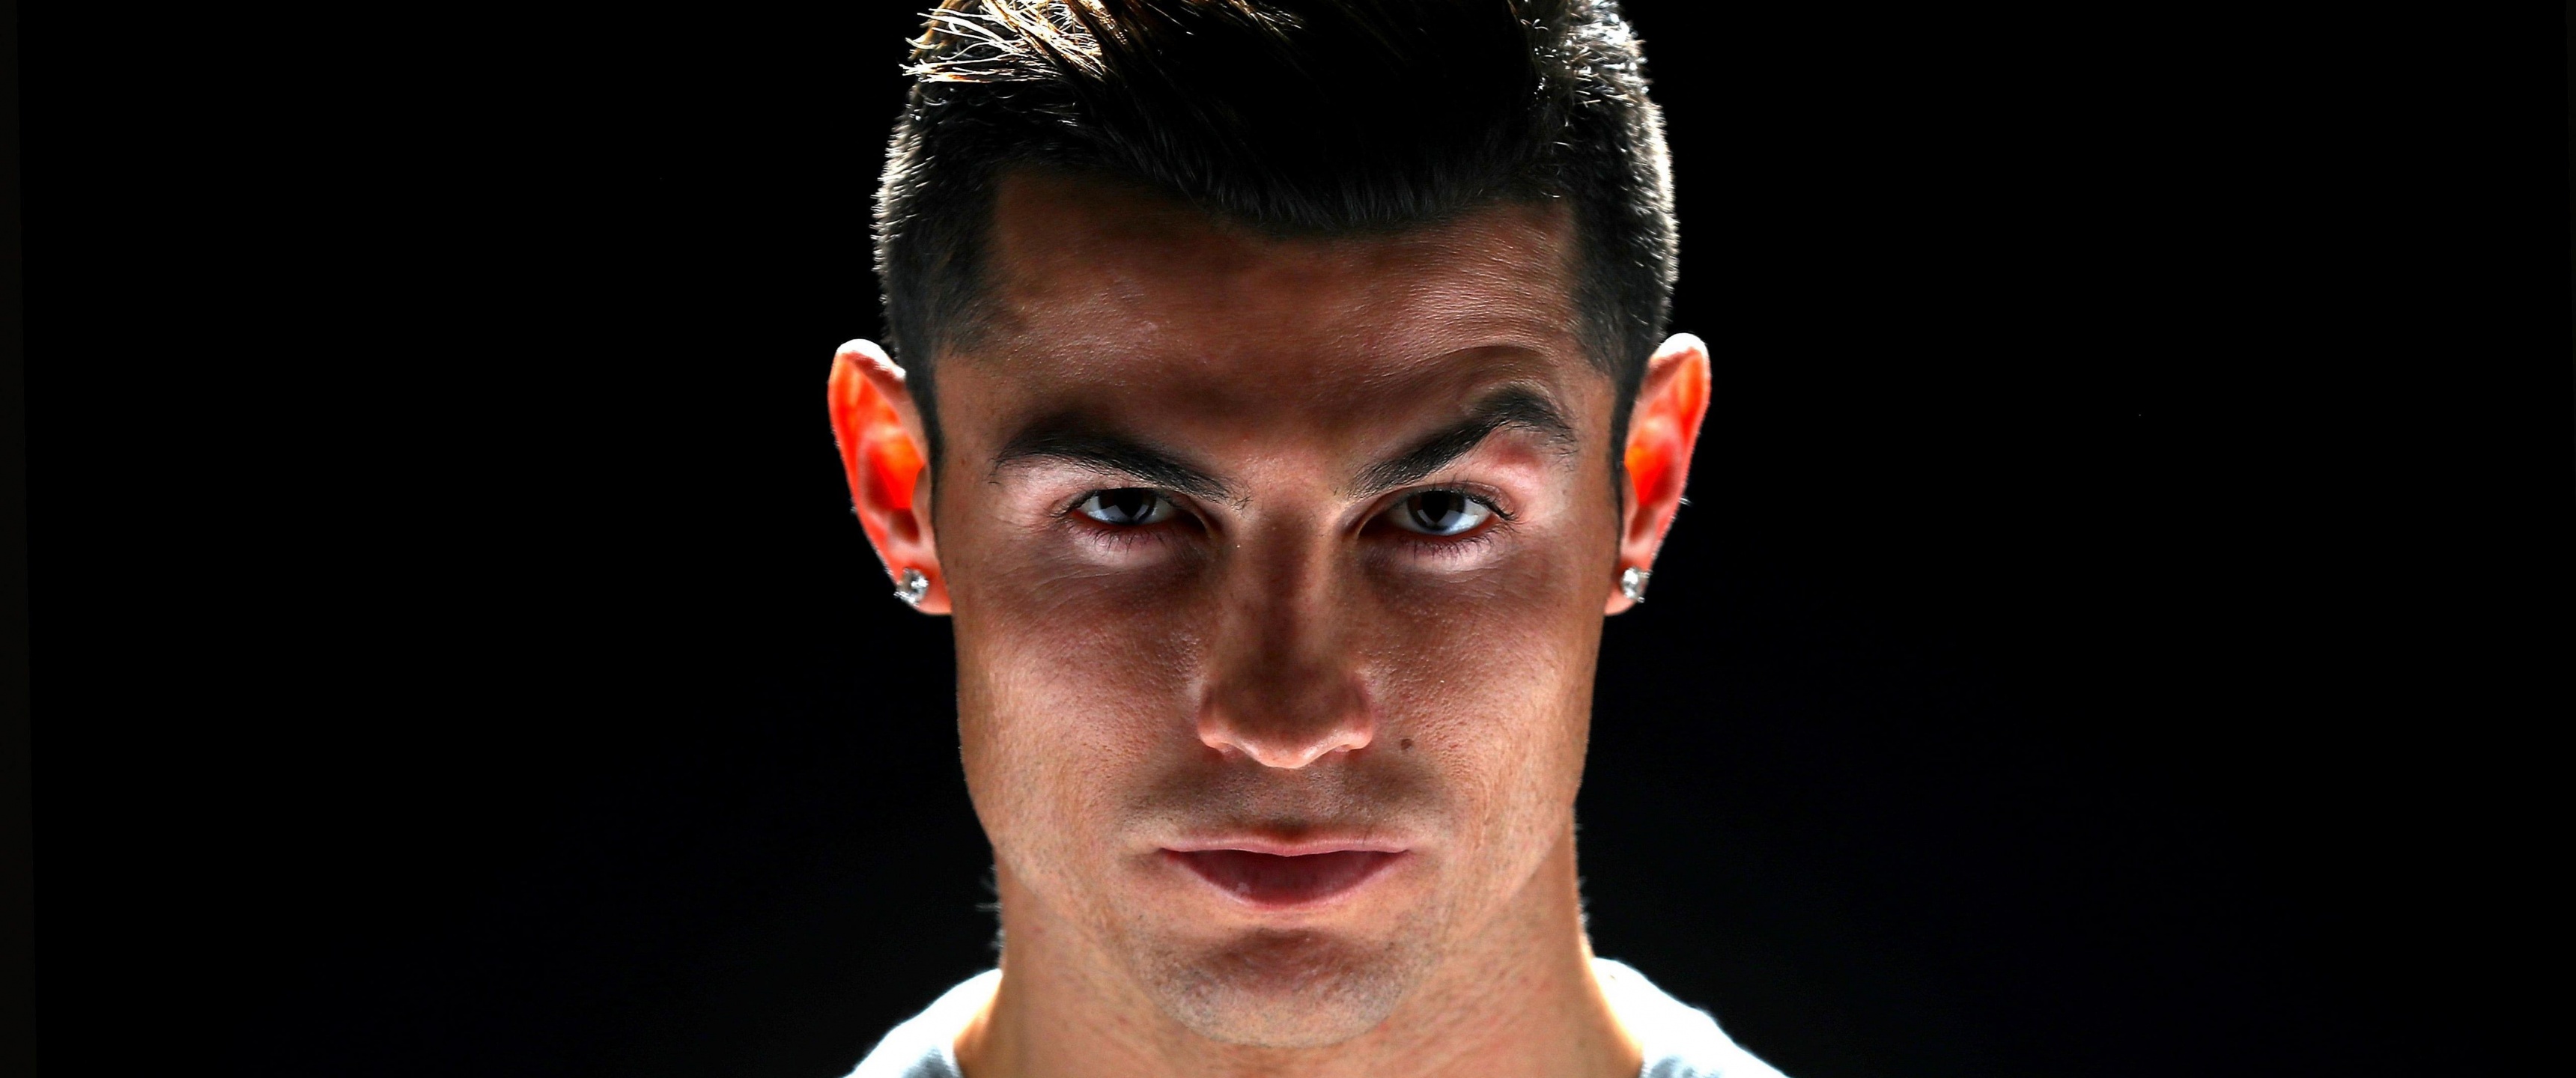 Download wallpapers Cristiano Ronaldo, back view, goal, Juventus FC,  football stars, neon lights, Serie A, Ronaldo, CR7, footballers, Portuguese  footballer, CR7 Juve, soccer, Bianconeri, creative for desktop with  resolution 2880x1800. High Quality